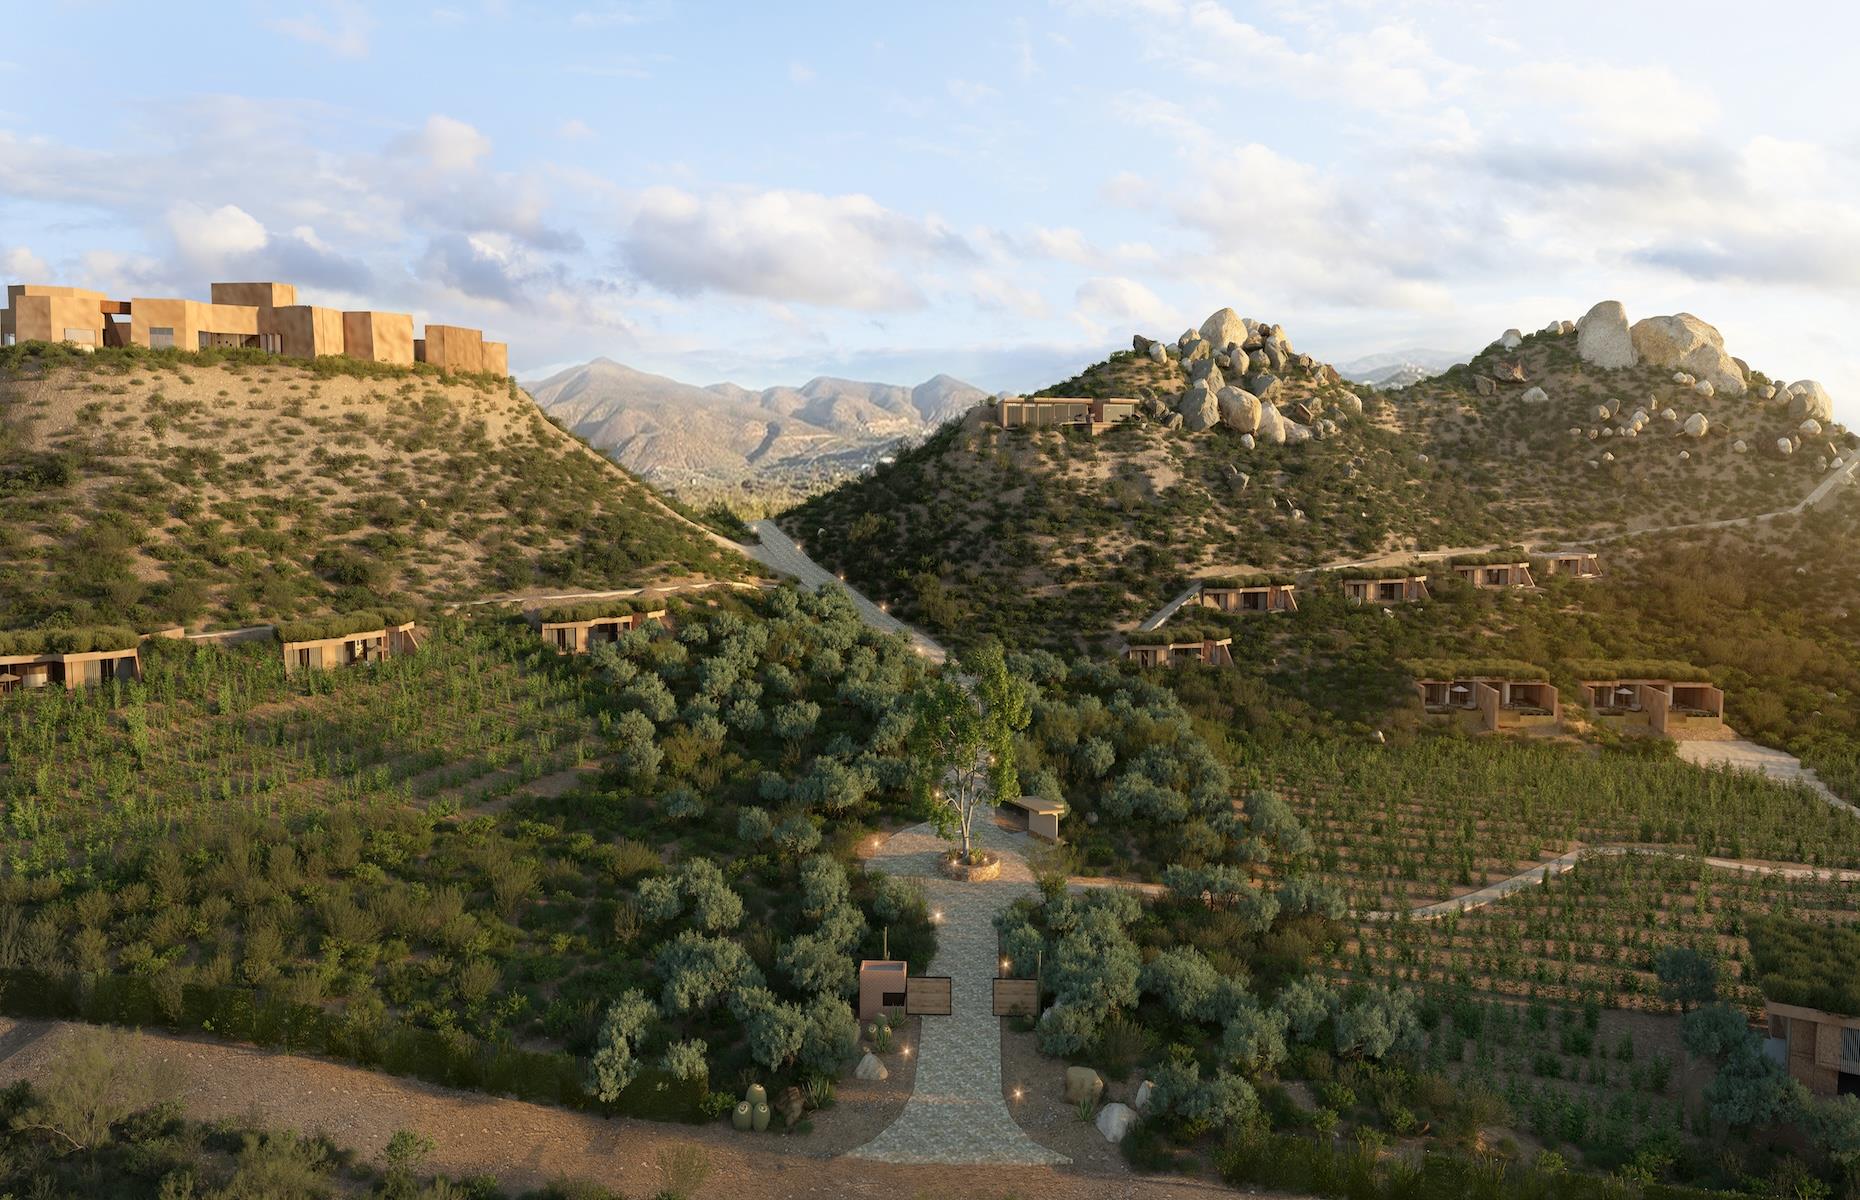 <p>Travelers looking for a truly transformative escape will do well to put Banyan Tree Veya, Valle de Guadalupe on their hit list. Opening in spring on Mexico’s northern Baja peninsula, the wellbeing resort will be the second outpost of the Banyan Tree Group's wellness-focused brand, Veya (the first is in Thailand). That’s not to say you can’t indulge, though: the secluded sanctuary-like space – with 30 exquisite villas designed by acclaimed Mexican architect Michel Rojkind – is set on a winery. As well as wellness, the local wine heritage is celebrated with a winemaking laboratory, underground cellar and tasting room – all organic and biodynamic, naturally. </p>